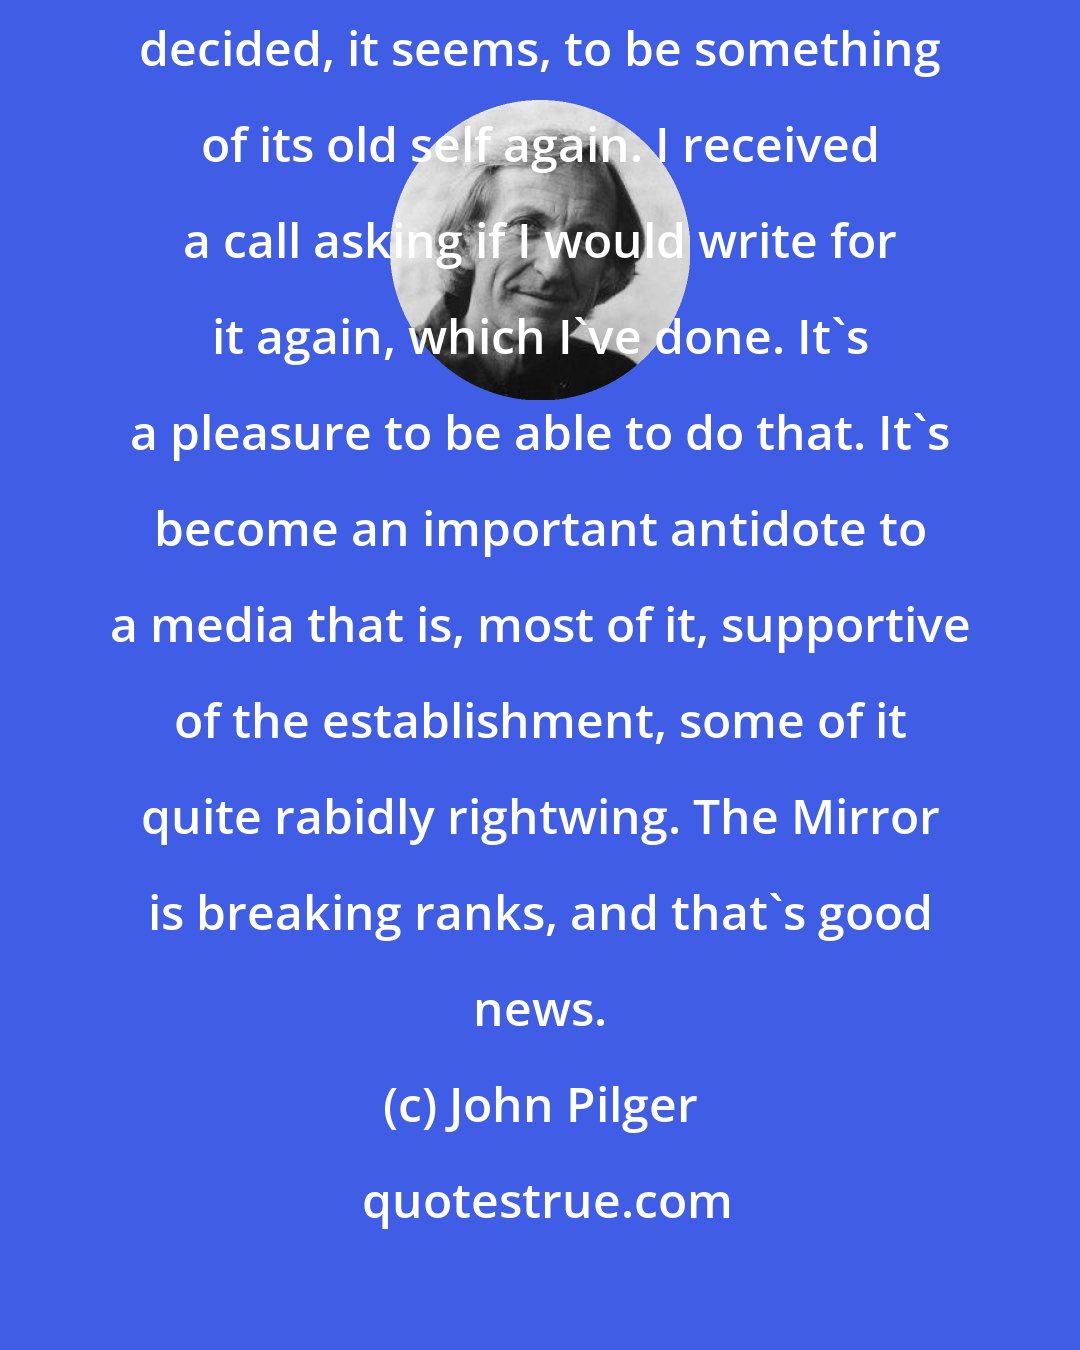 John Pilger: Since September 11, the Mirror has reached back to its roots, and decided, it seems, to be something of its old self again. I received a call asking if I would write for it again, which I've done. It's a pleasure to be able to do that. It's become an important antidote to a media that is, most of it, supportive of the establishment, some of it quite rabidly rightwing. The Mirror is breaking ranks, and that's good news.